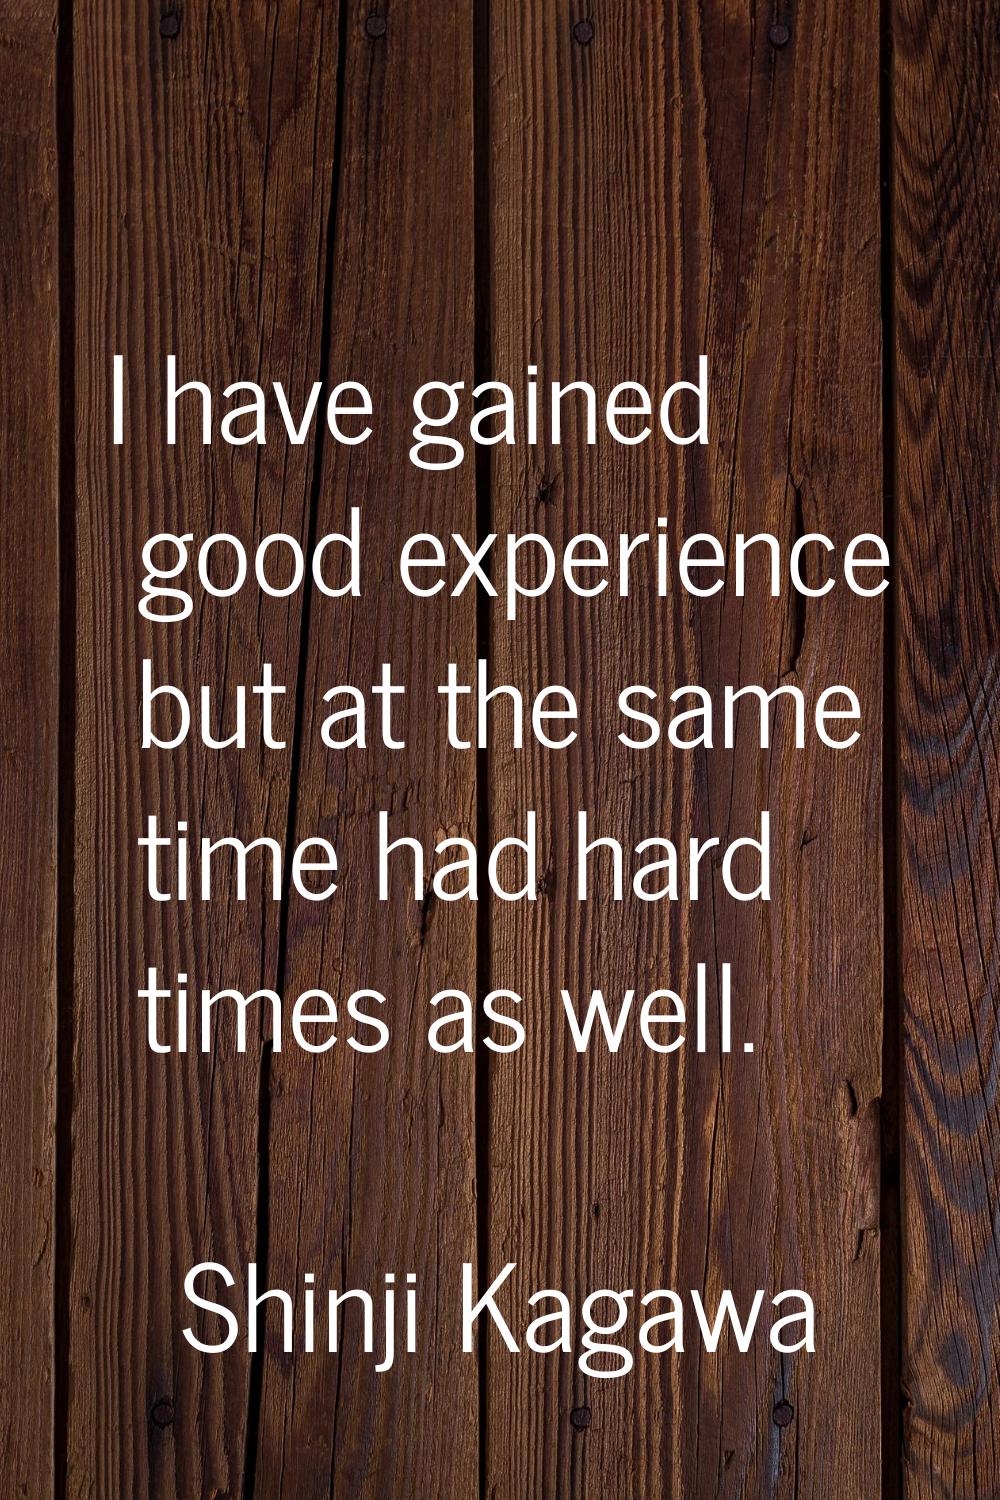 I have gained good experience but at the same time had hard times as well.